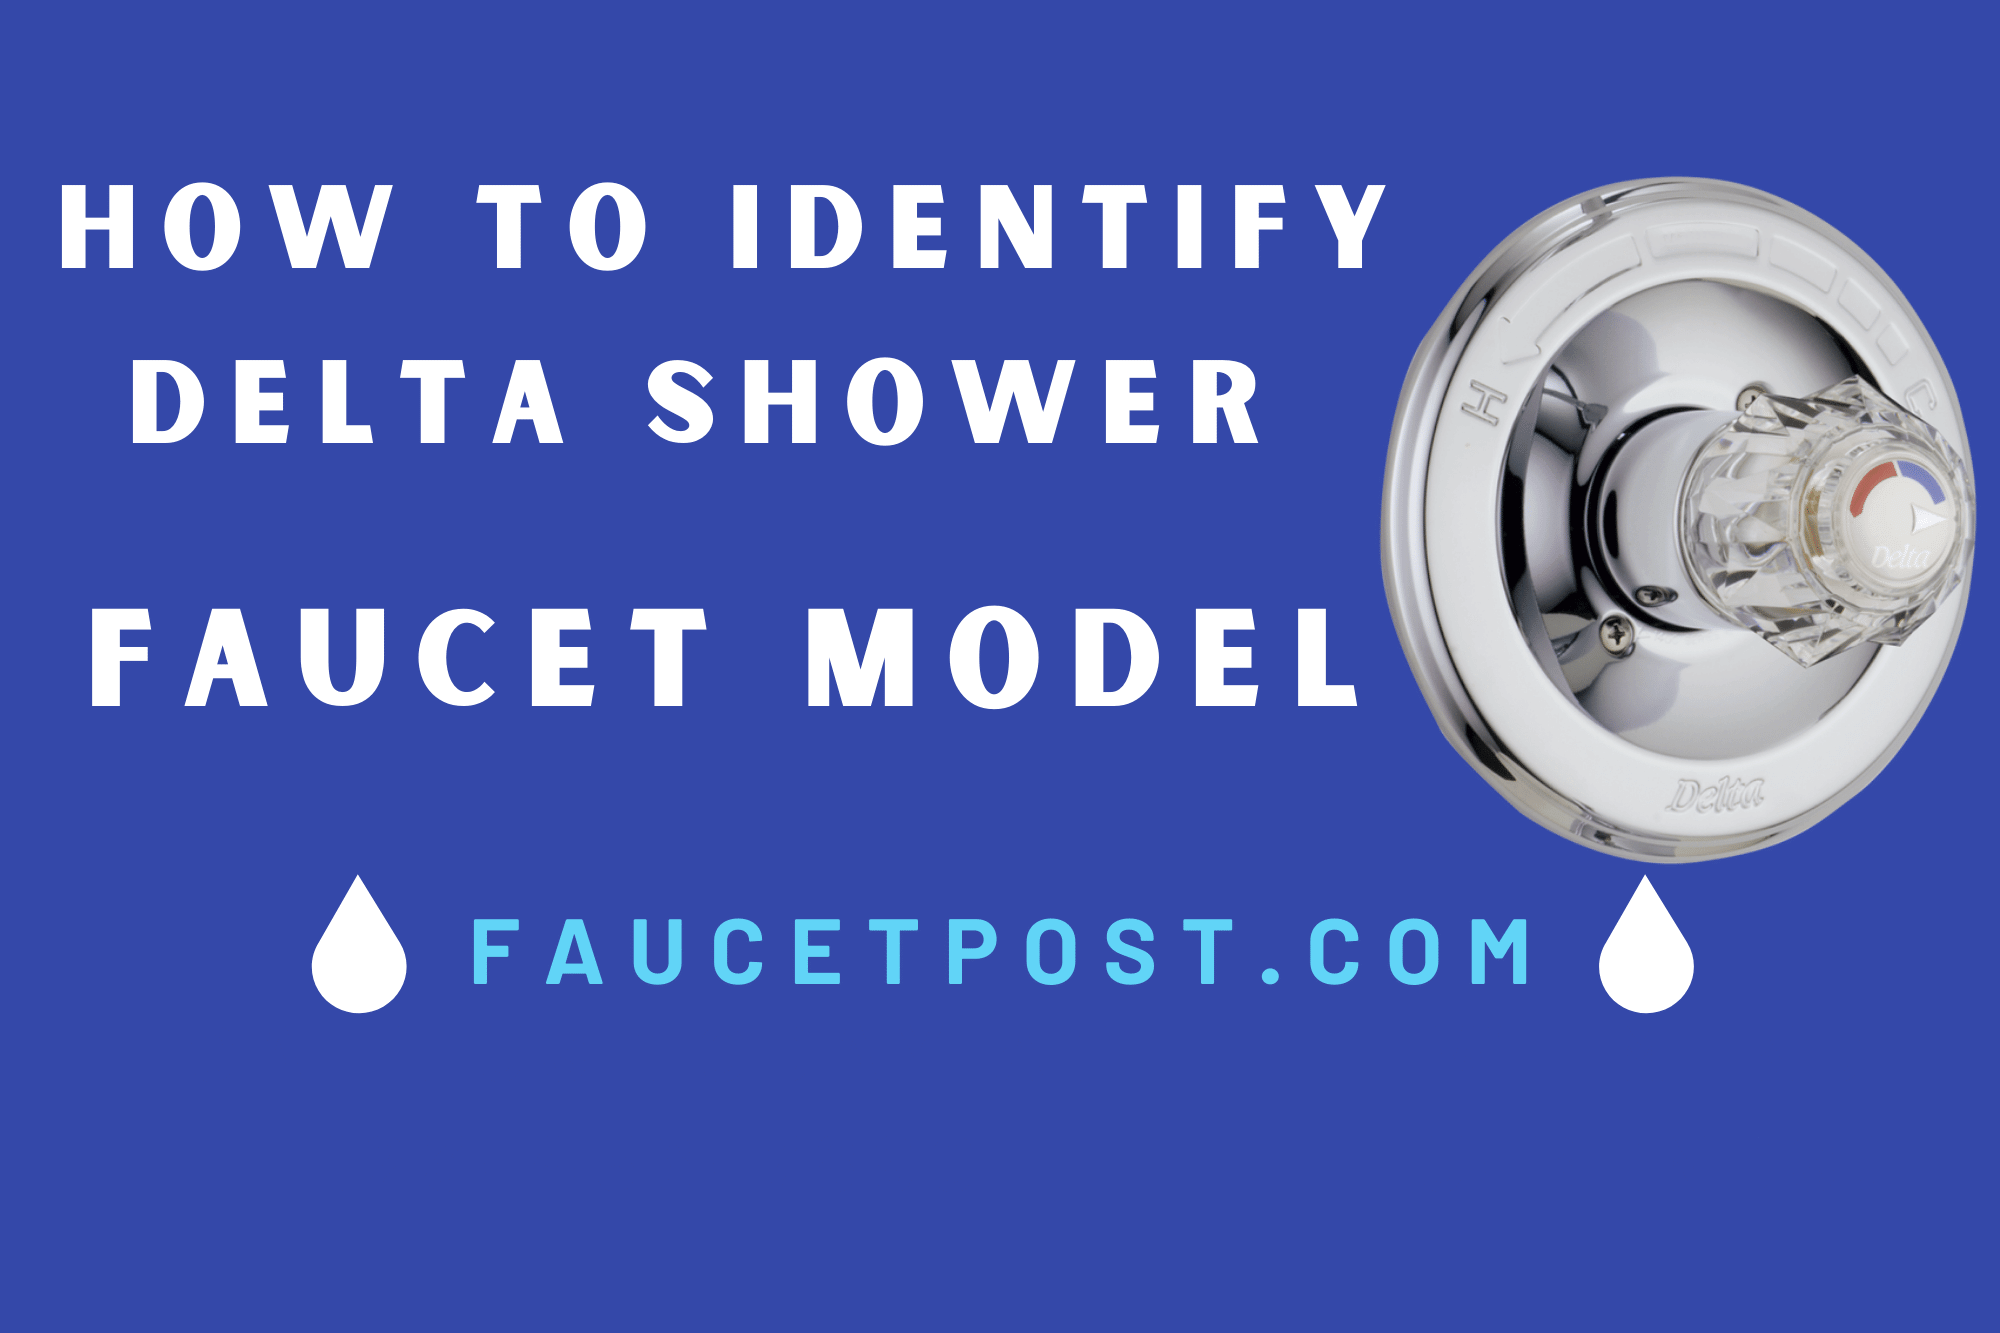 How to Identify Delta Shower Faucet Model